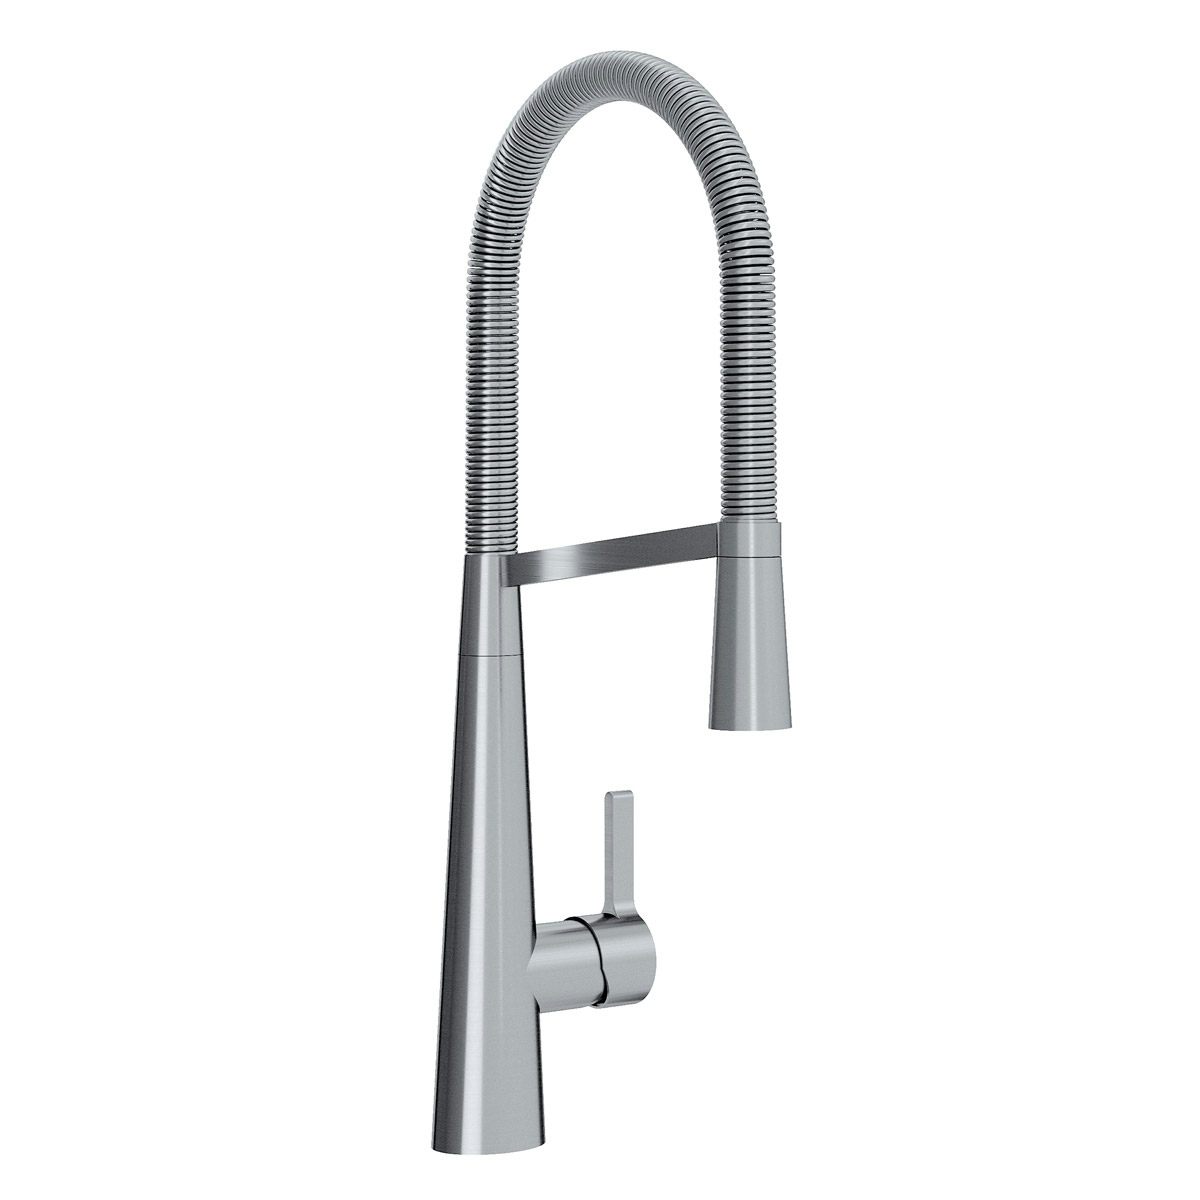 Bristan Saffron brushed nickel single lever kitchen mixer tap with pull down spout